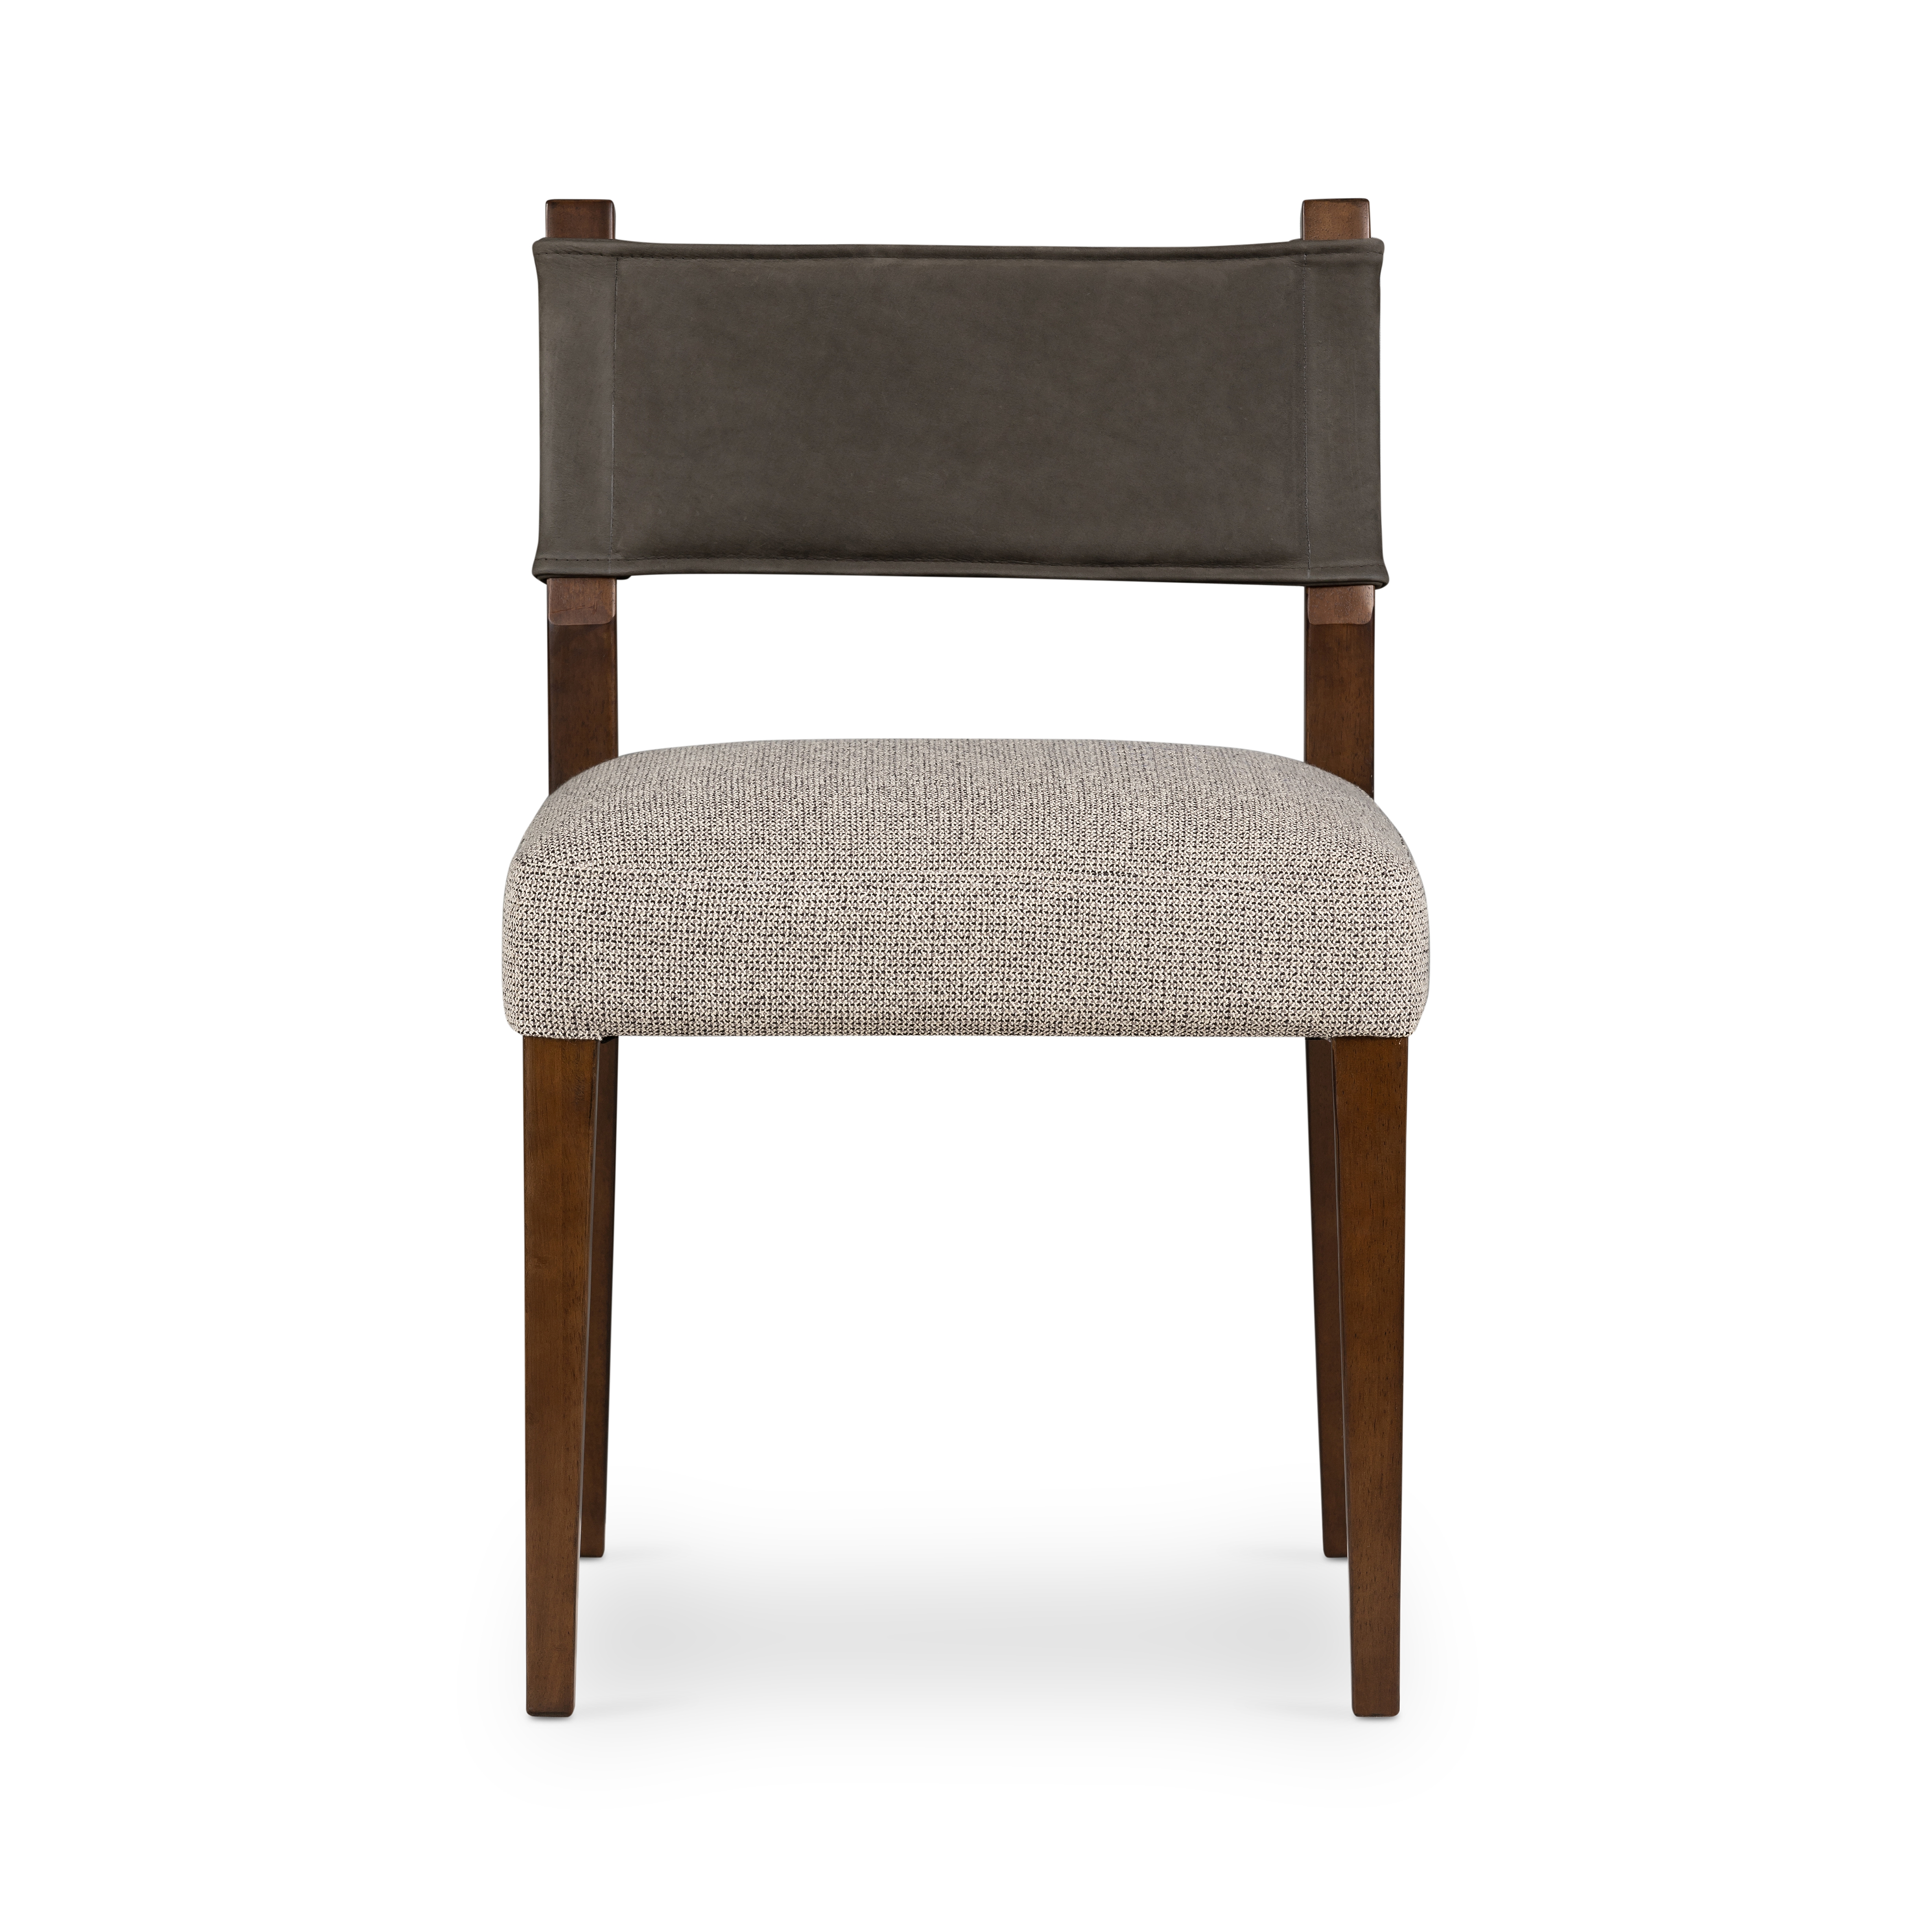 Ferris Dining Chair-Nubuck Charcoal - Image 3